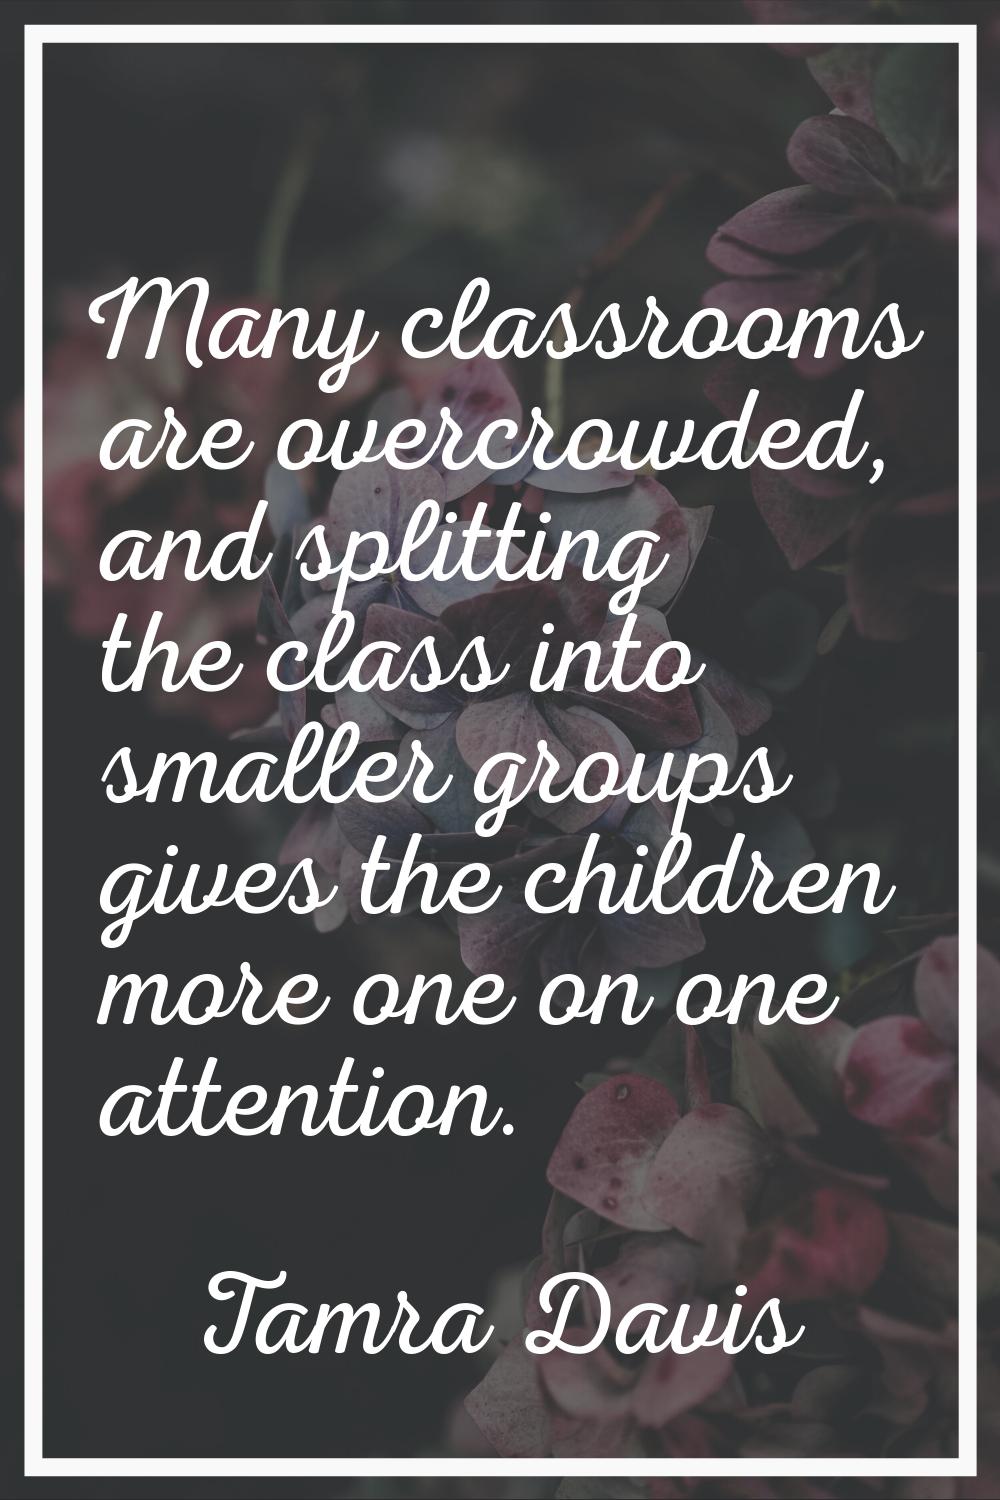 Many classrooms are overcrowded, and splitting the class into smaller groups gives the children mor